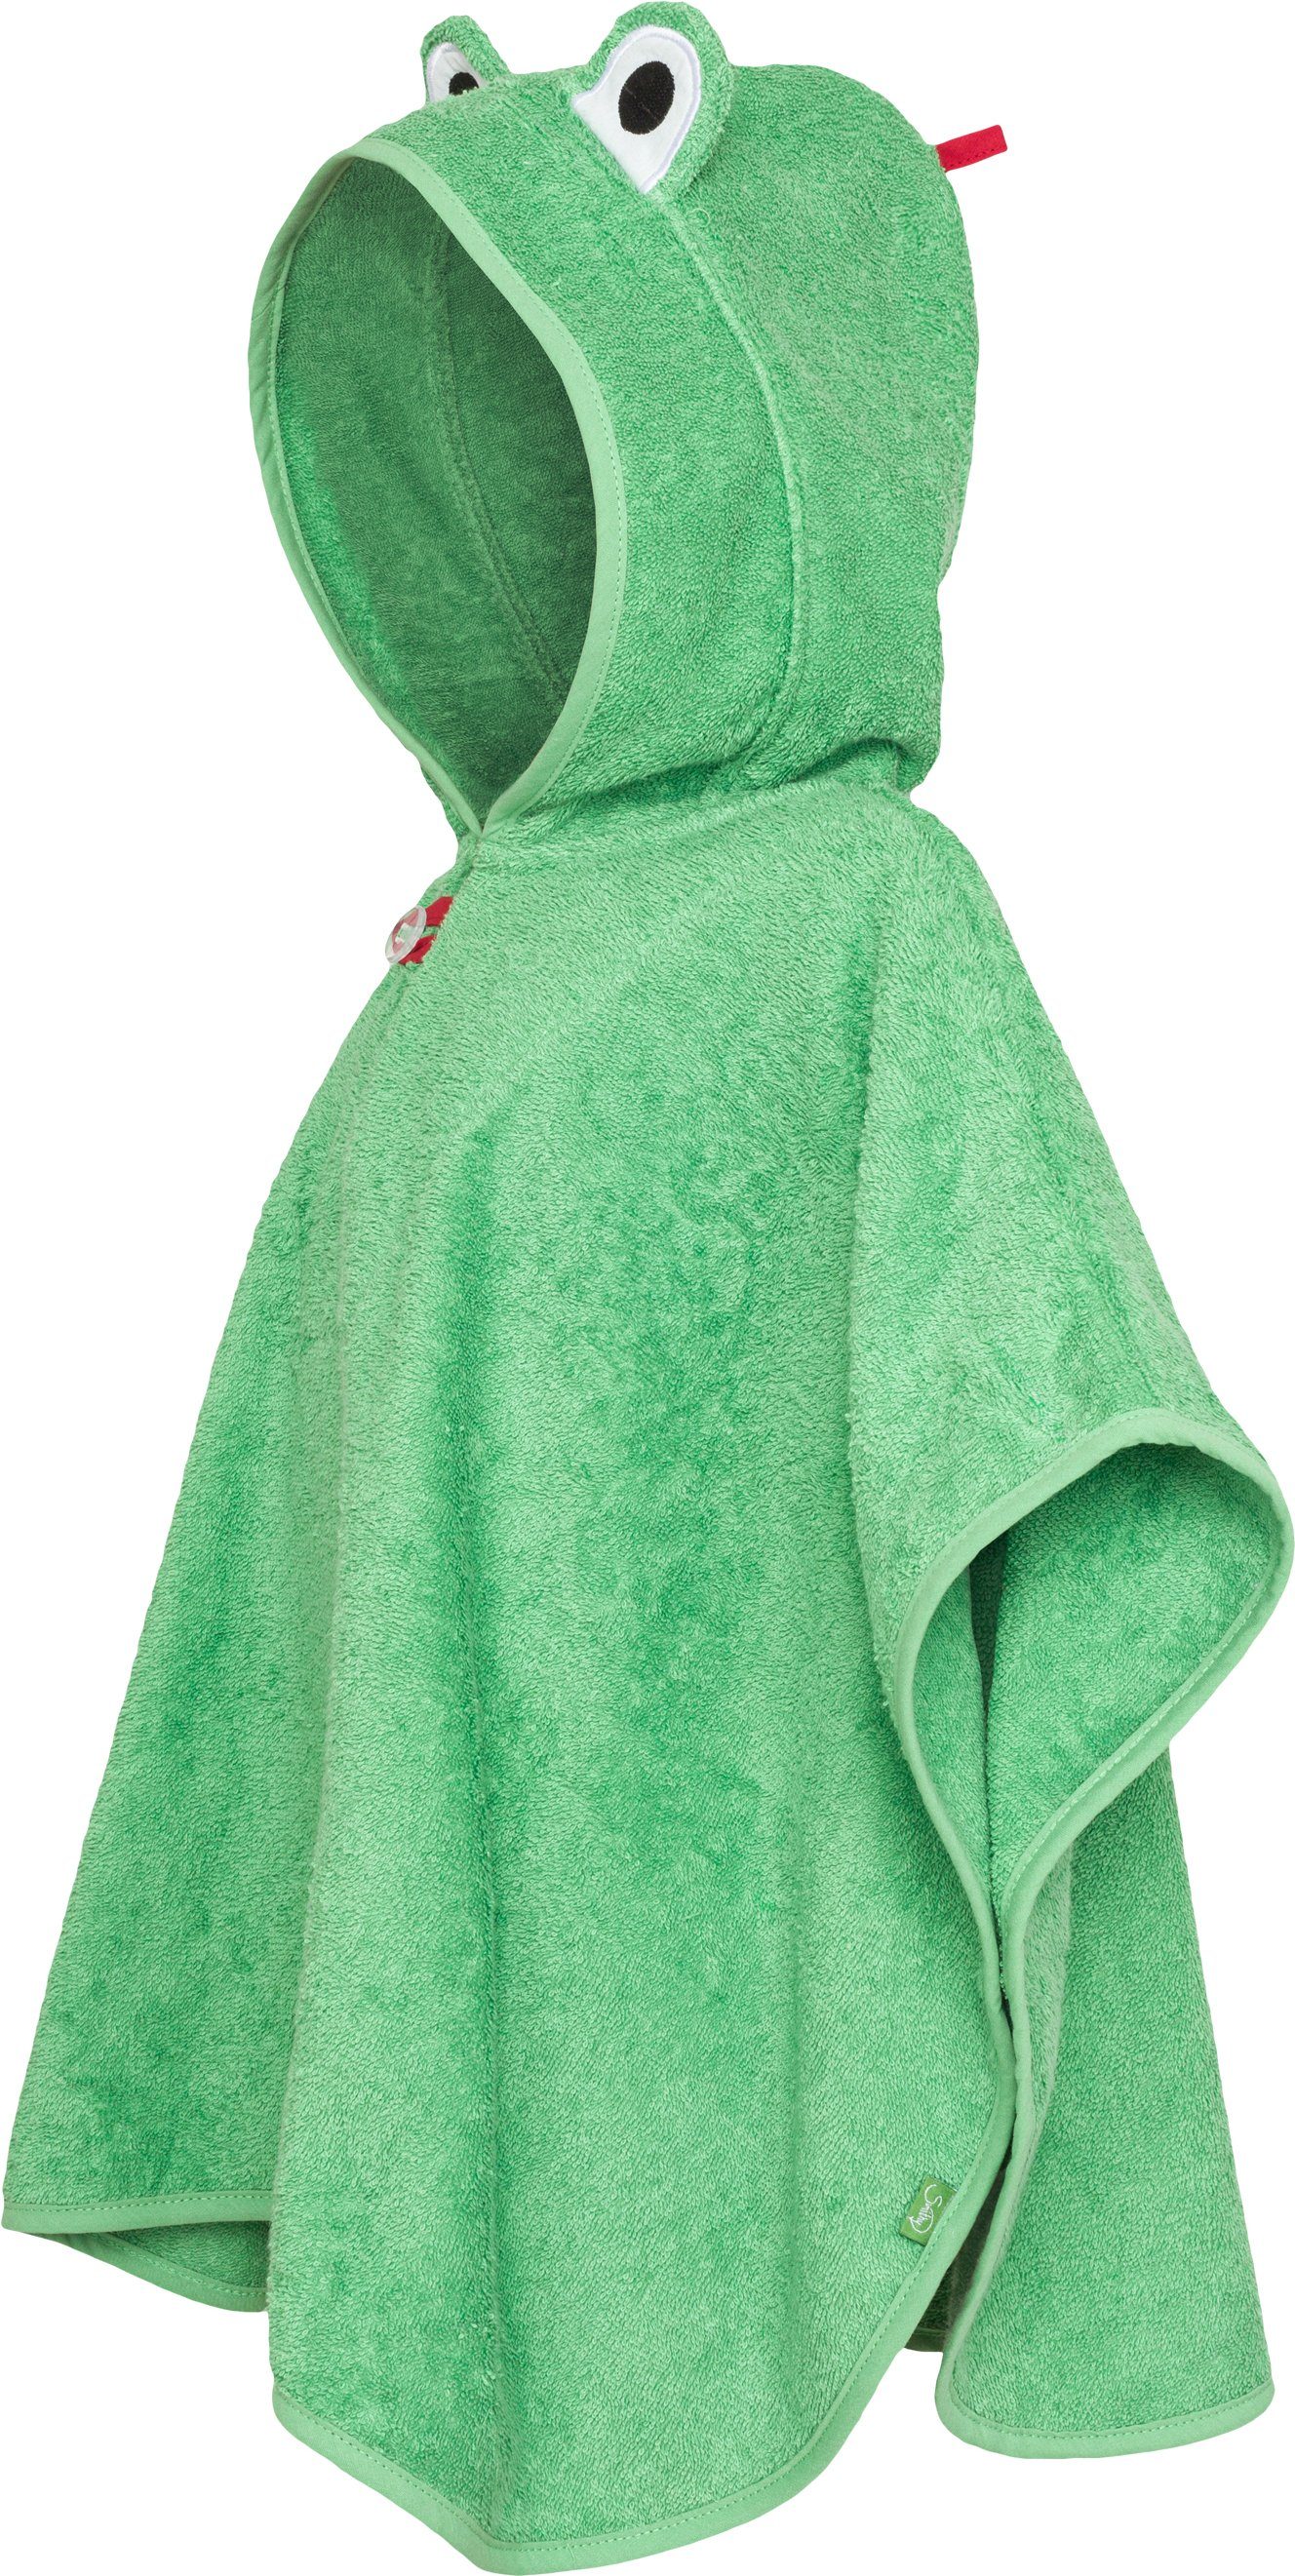 Frottee, Europe Frottee, Smithy Baby Frosch, am in made Badeponcho Armloch, grün, Knöpfe